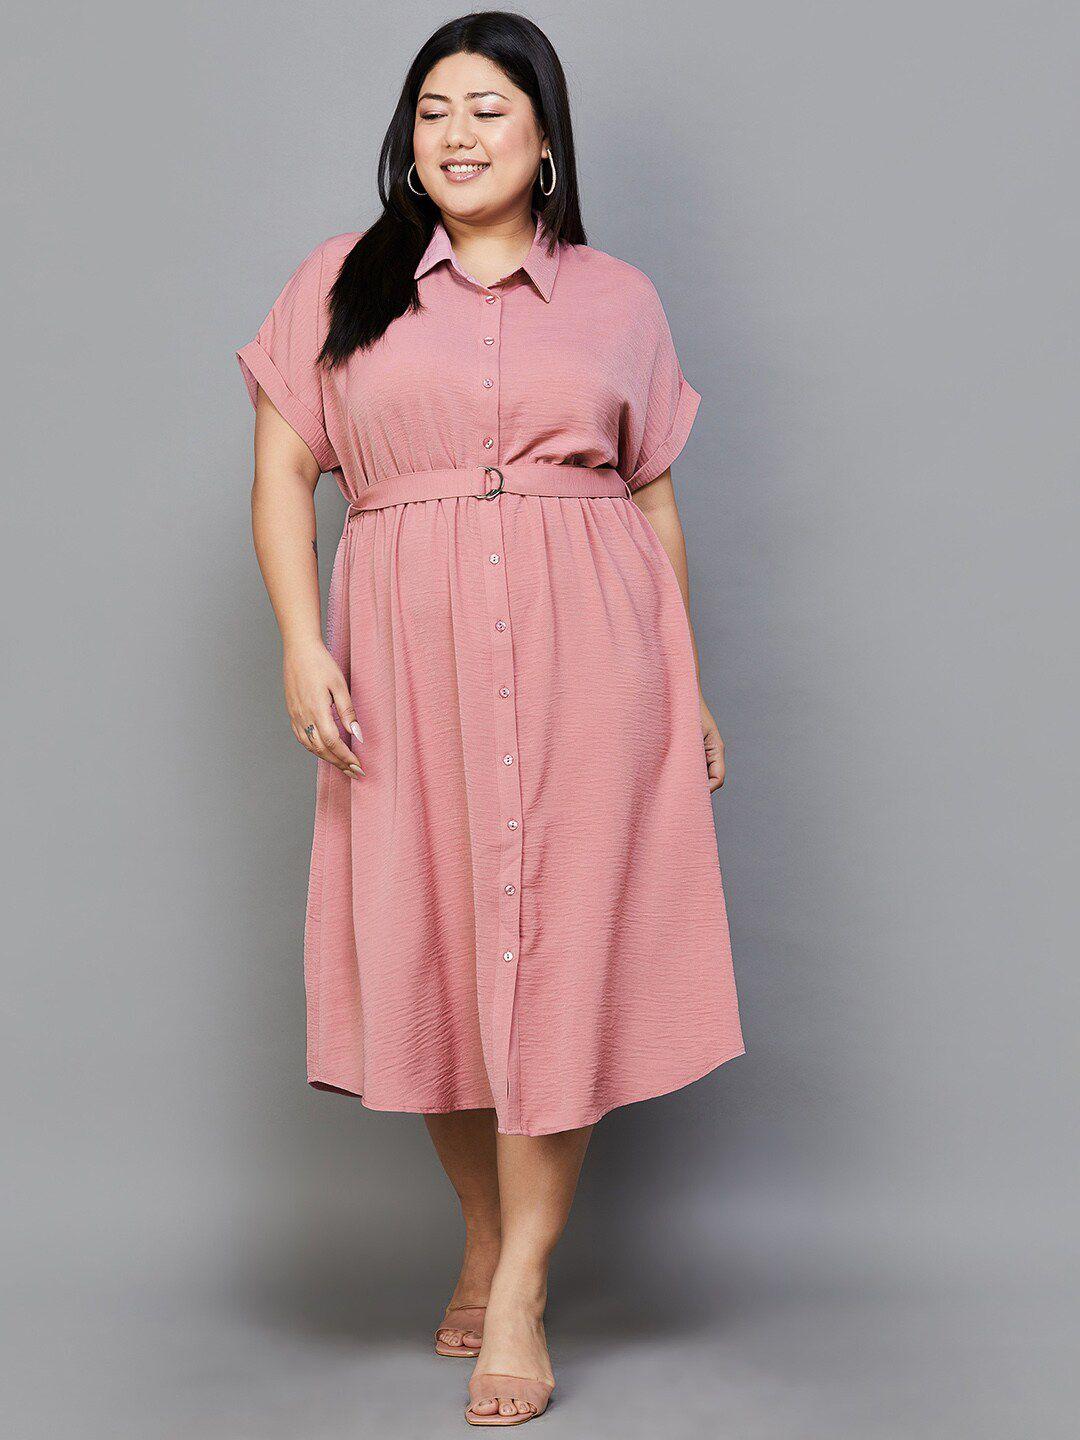 nexus-by-lifestyle-plus-size-extended-sleeves-shirt-style-midi-dress